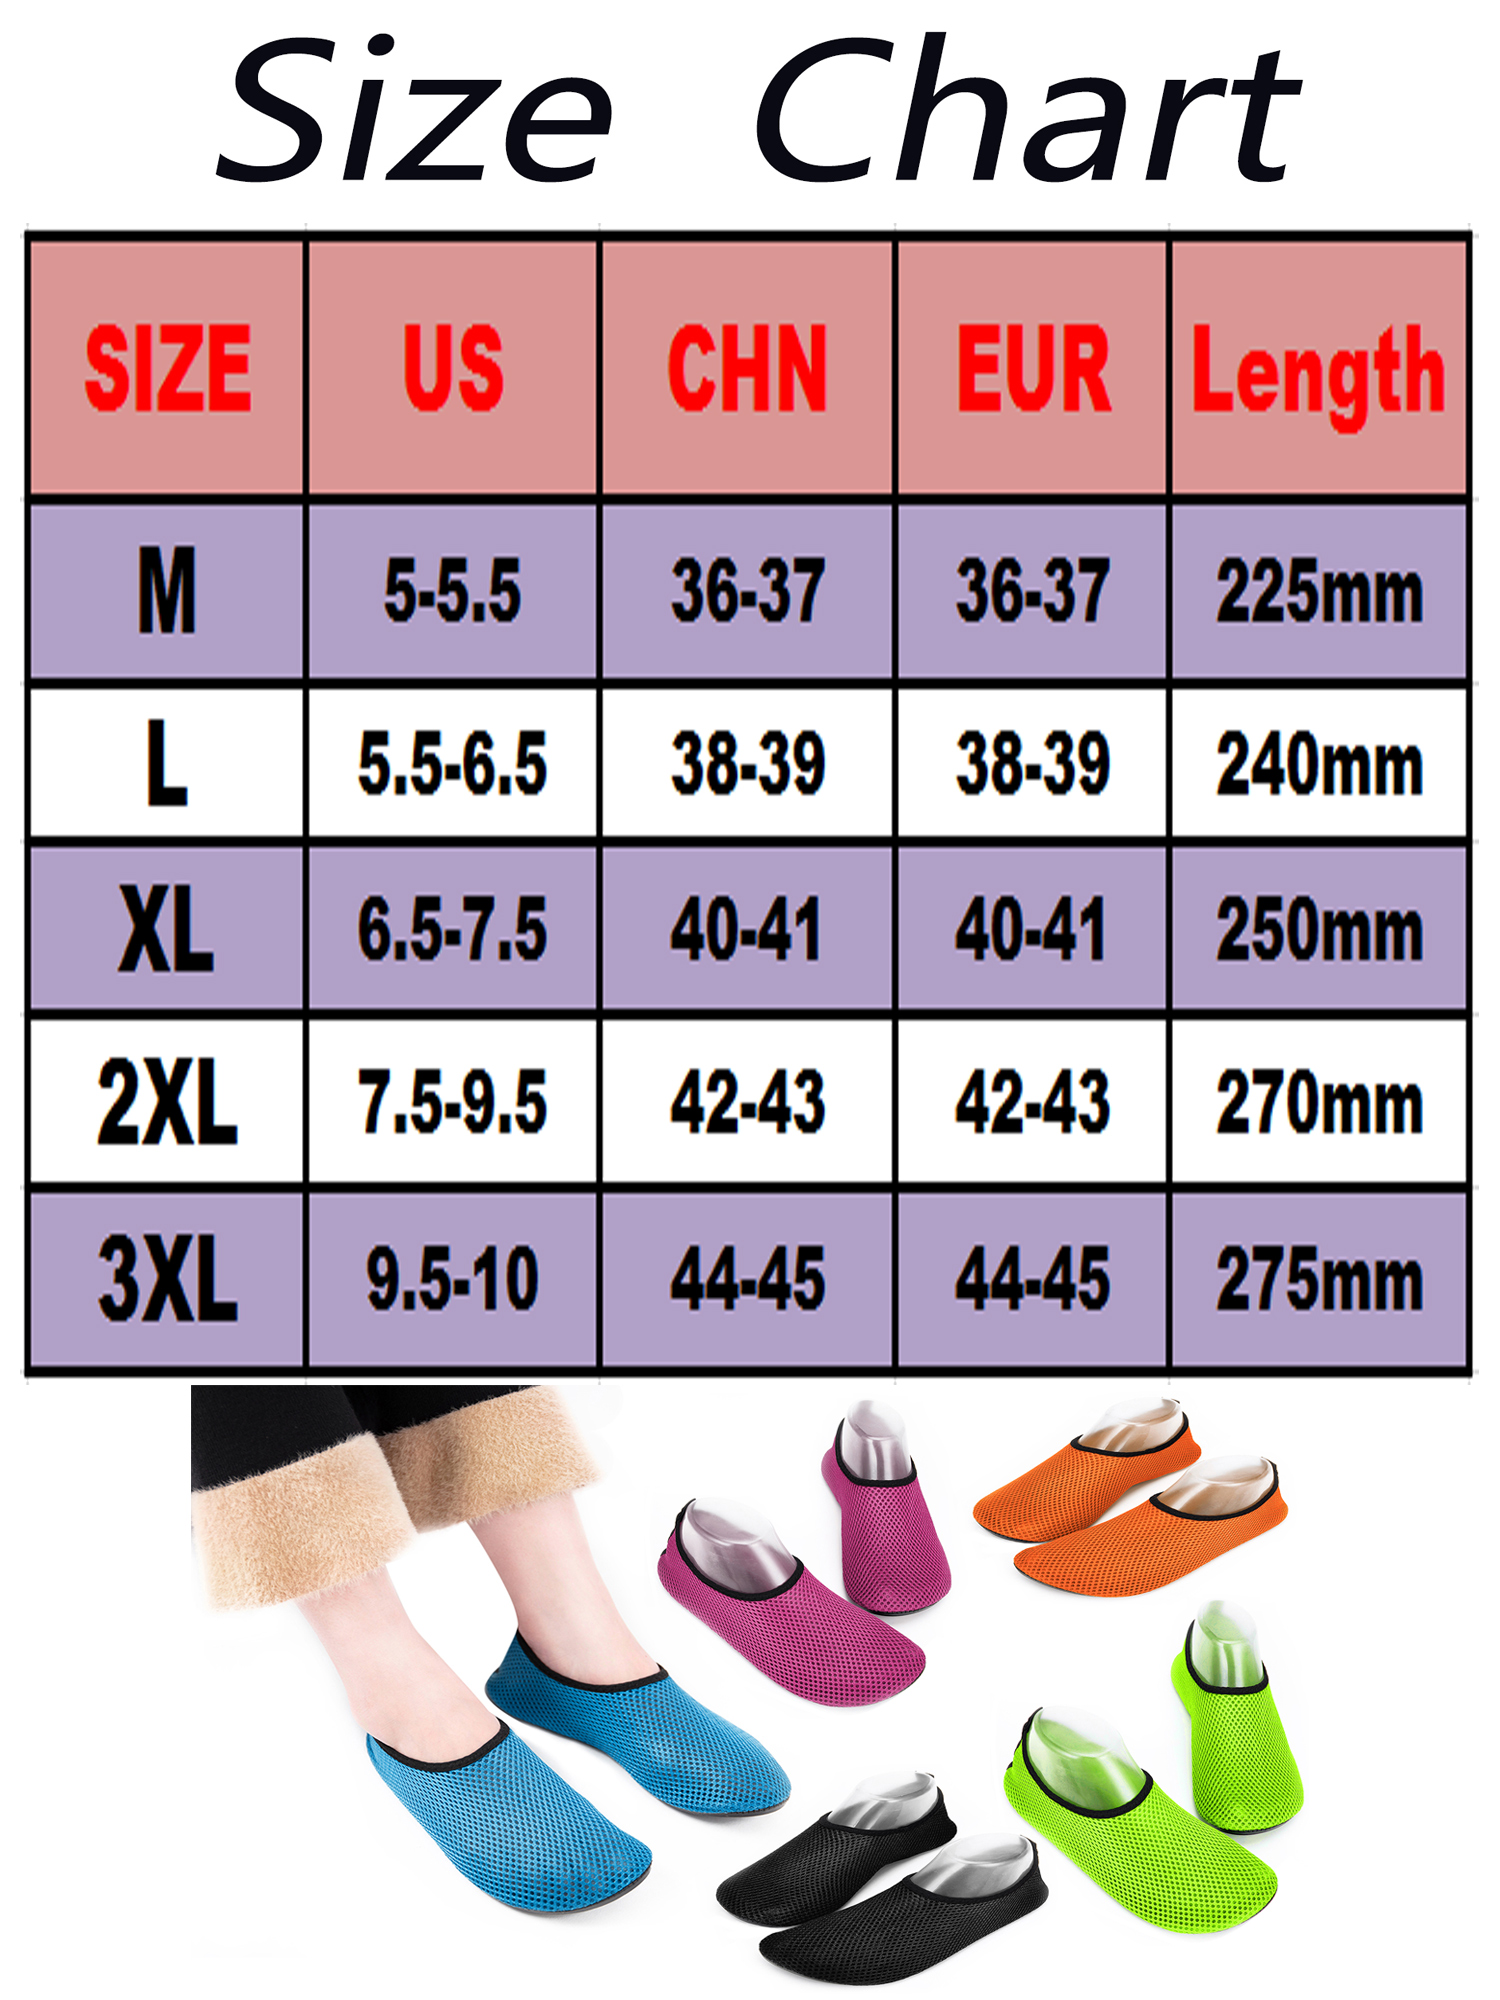 Unisex Water Shoes Barefoot Shoes Quick Dry Aqua Socks for Outdoor Beach Walking, Swiming, Surfing, Snorkeling,Yoga for Teenager and Adult - image 2 of 7